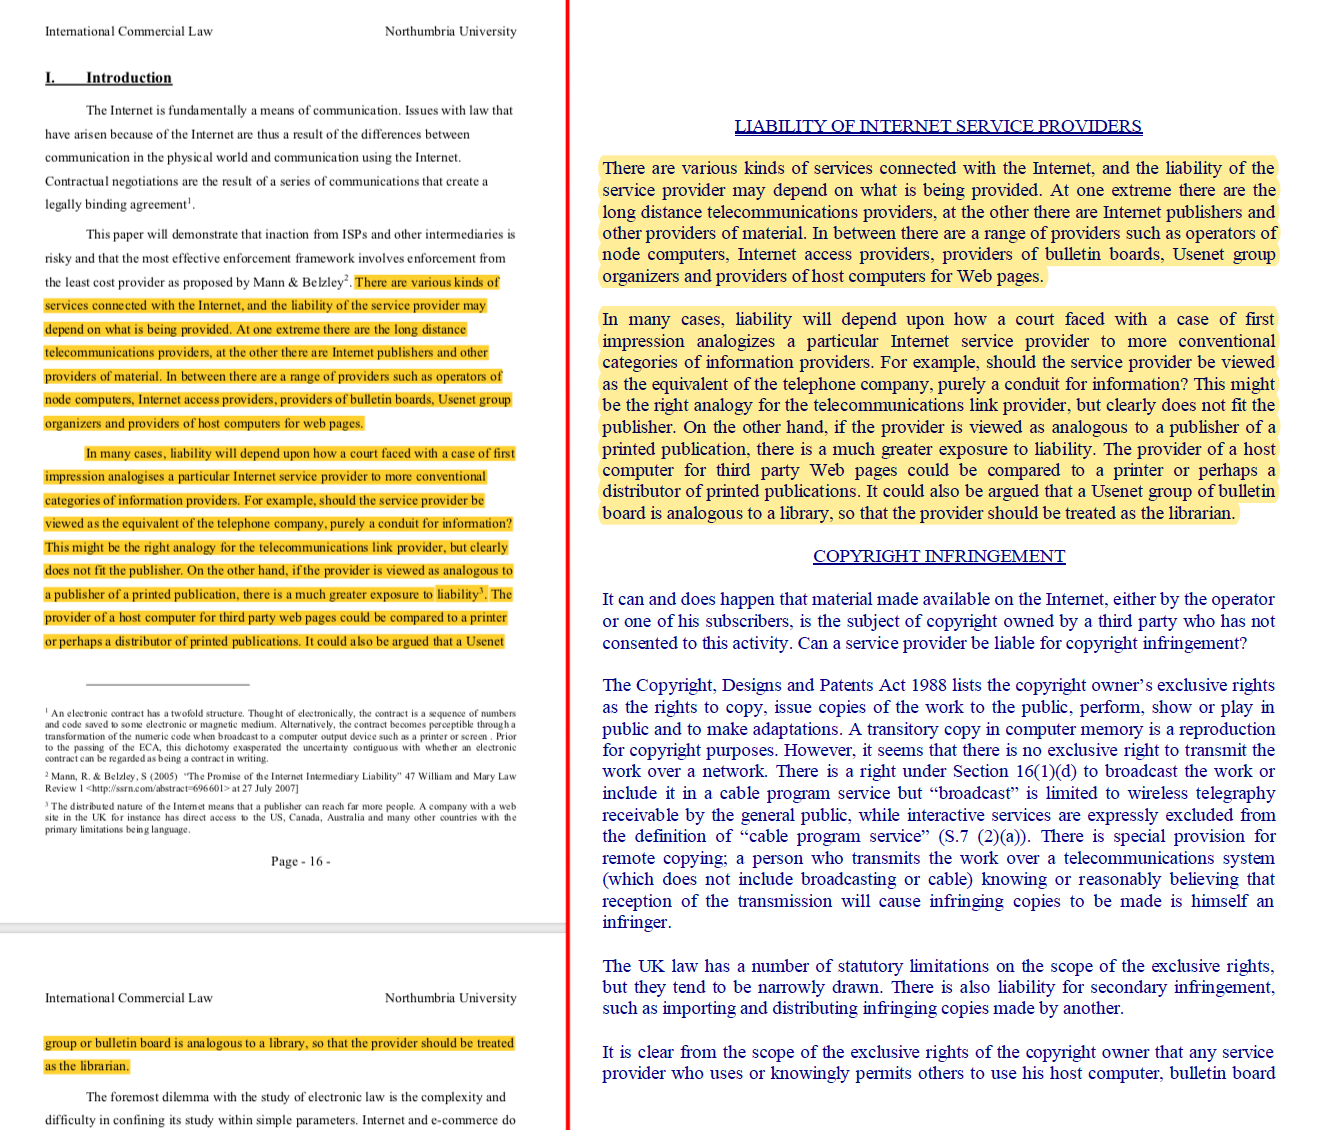 Screengrab showing a comparison of Wright’s dissertation (left) and Pearson’s 1996 paper (right)